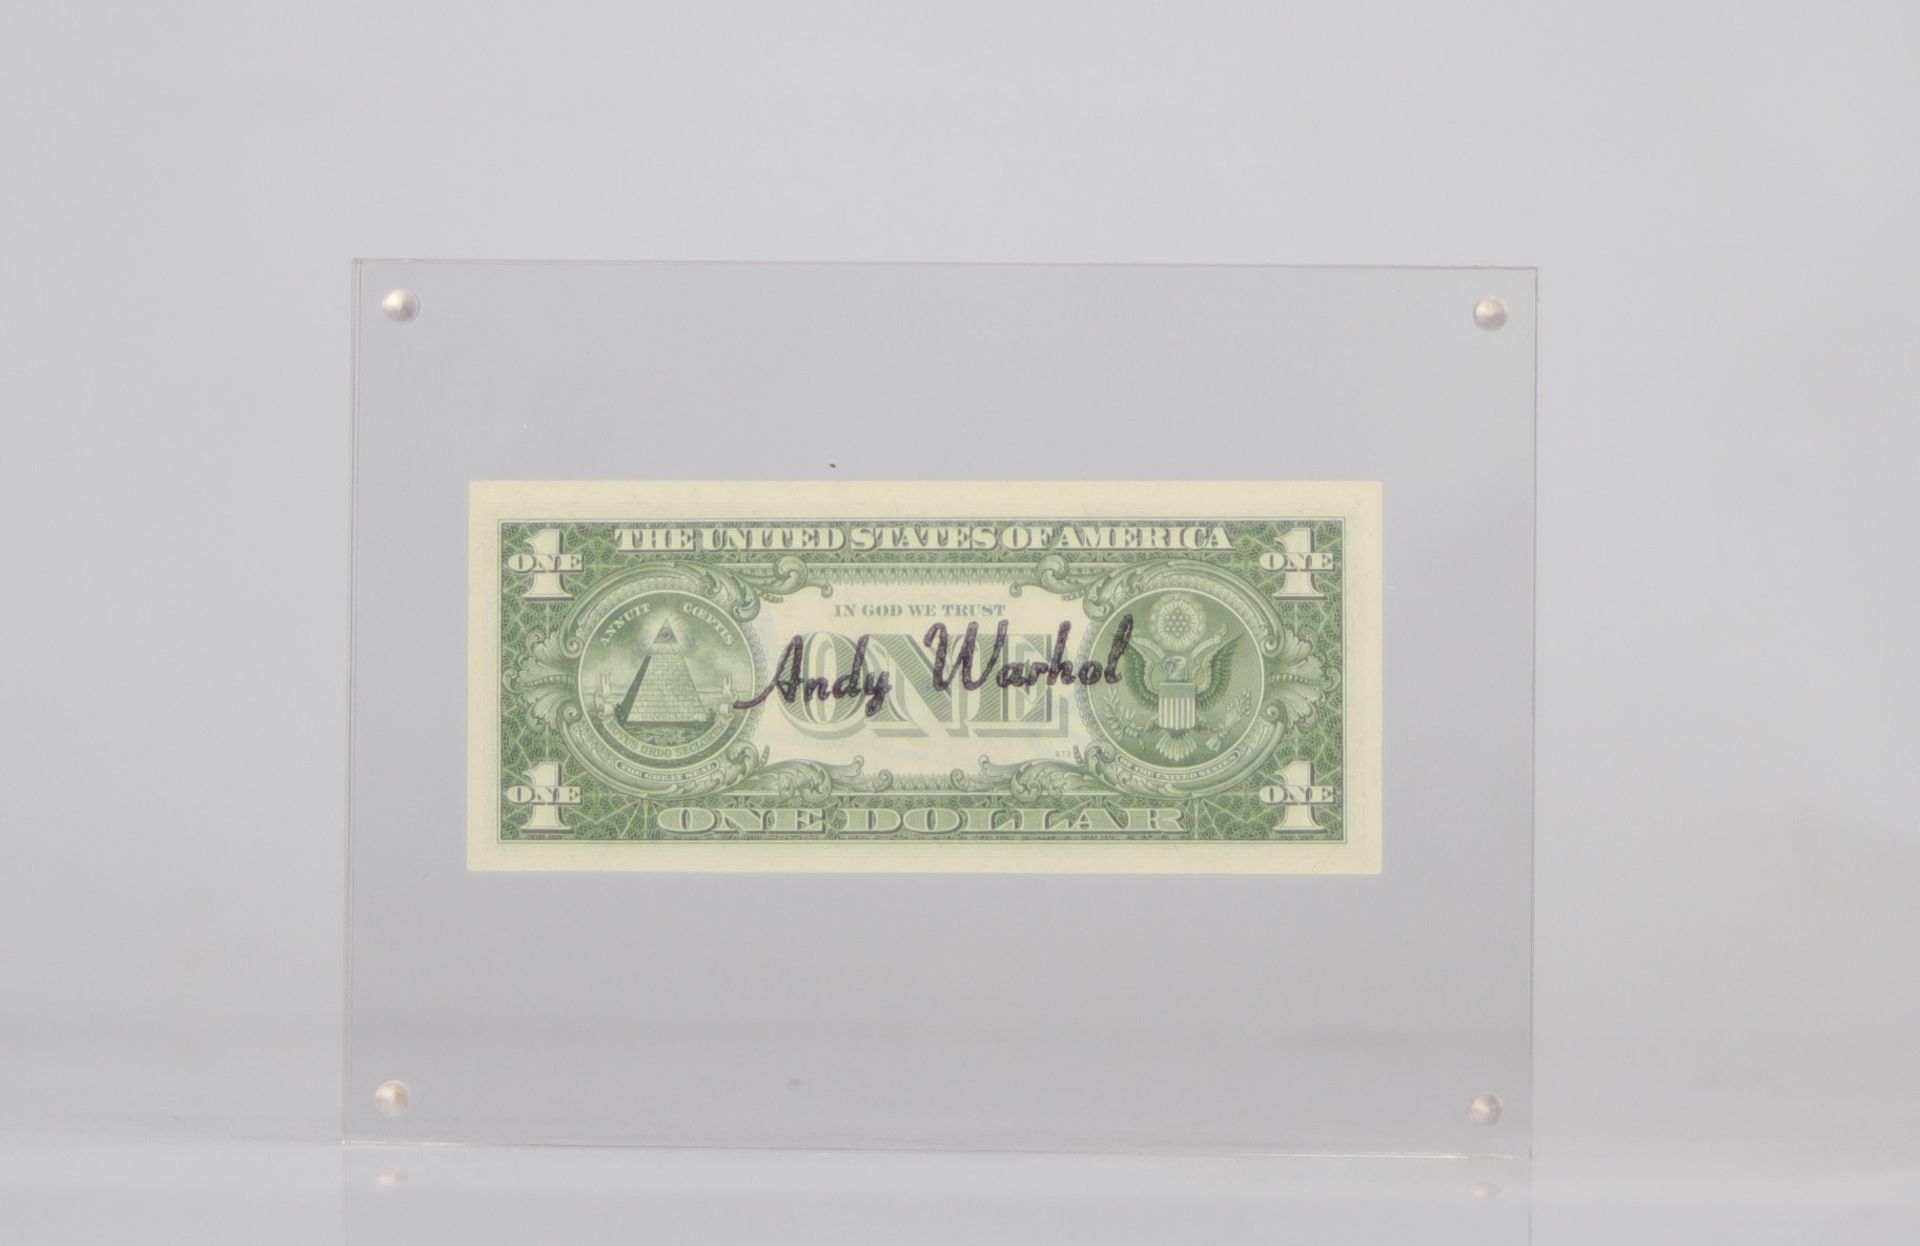 Andy Warhol. 1 dollar bill embellished with the signature of "Andy Warhol" in felt pen. - Image 3 of 3